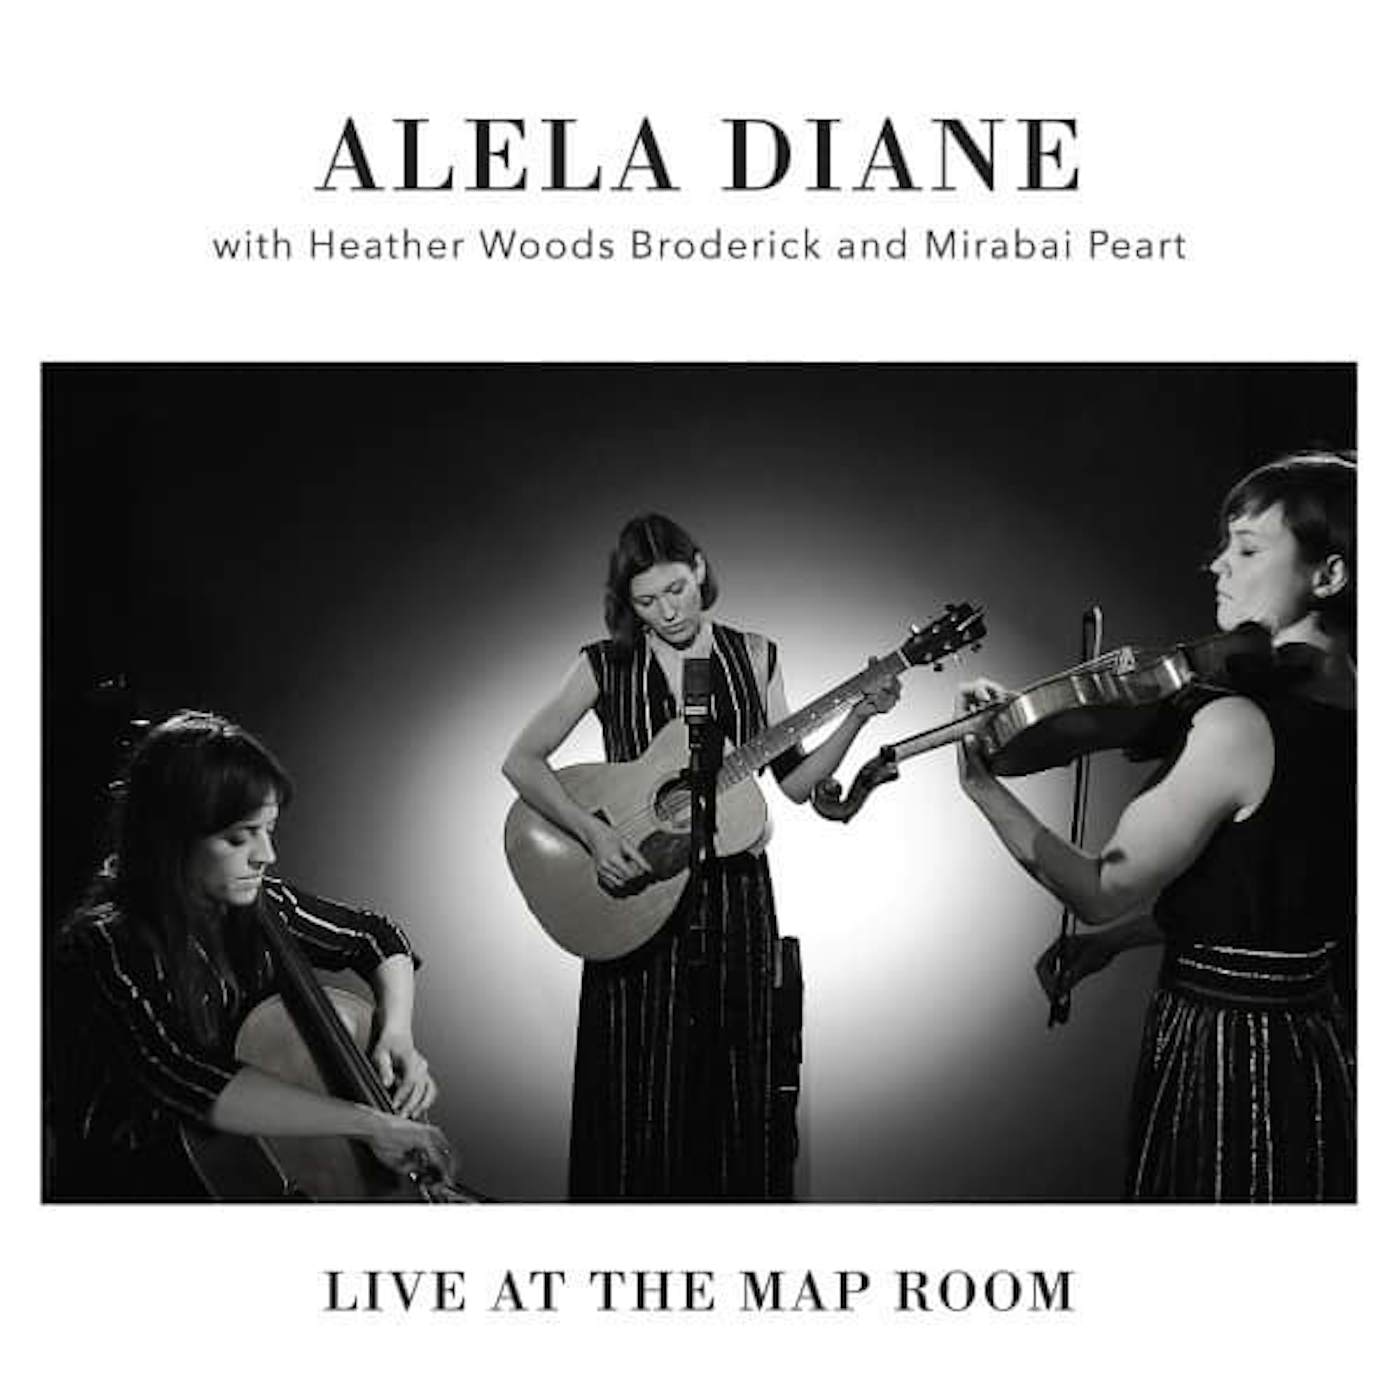 Alela Diane Live at the Map Room Vinyl Record